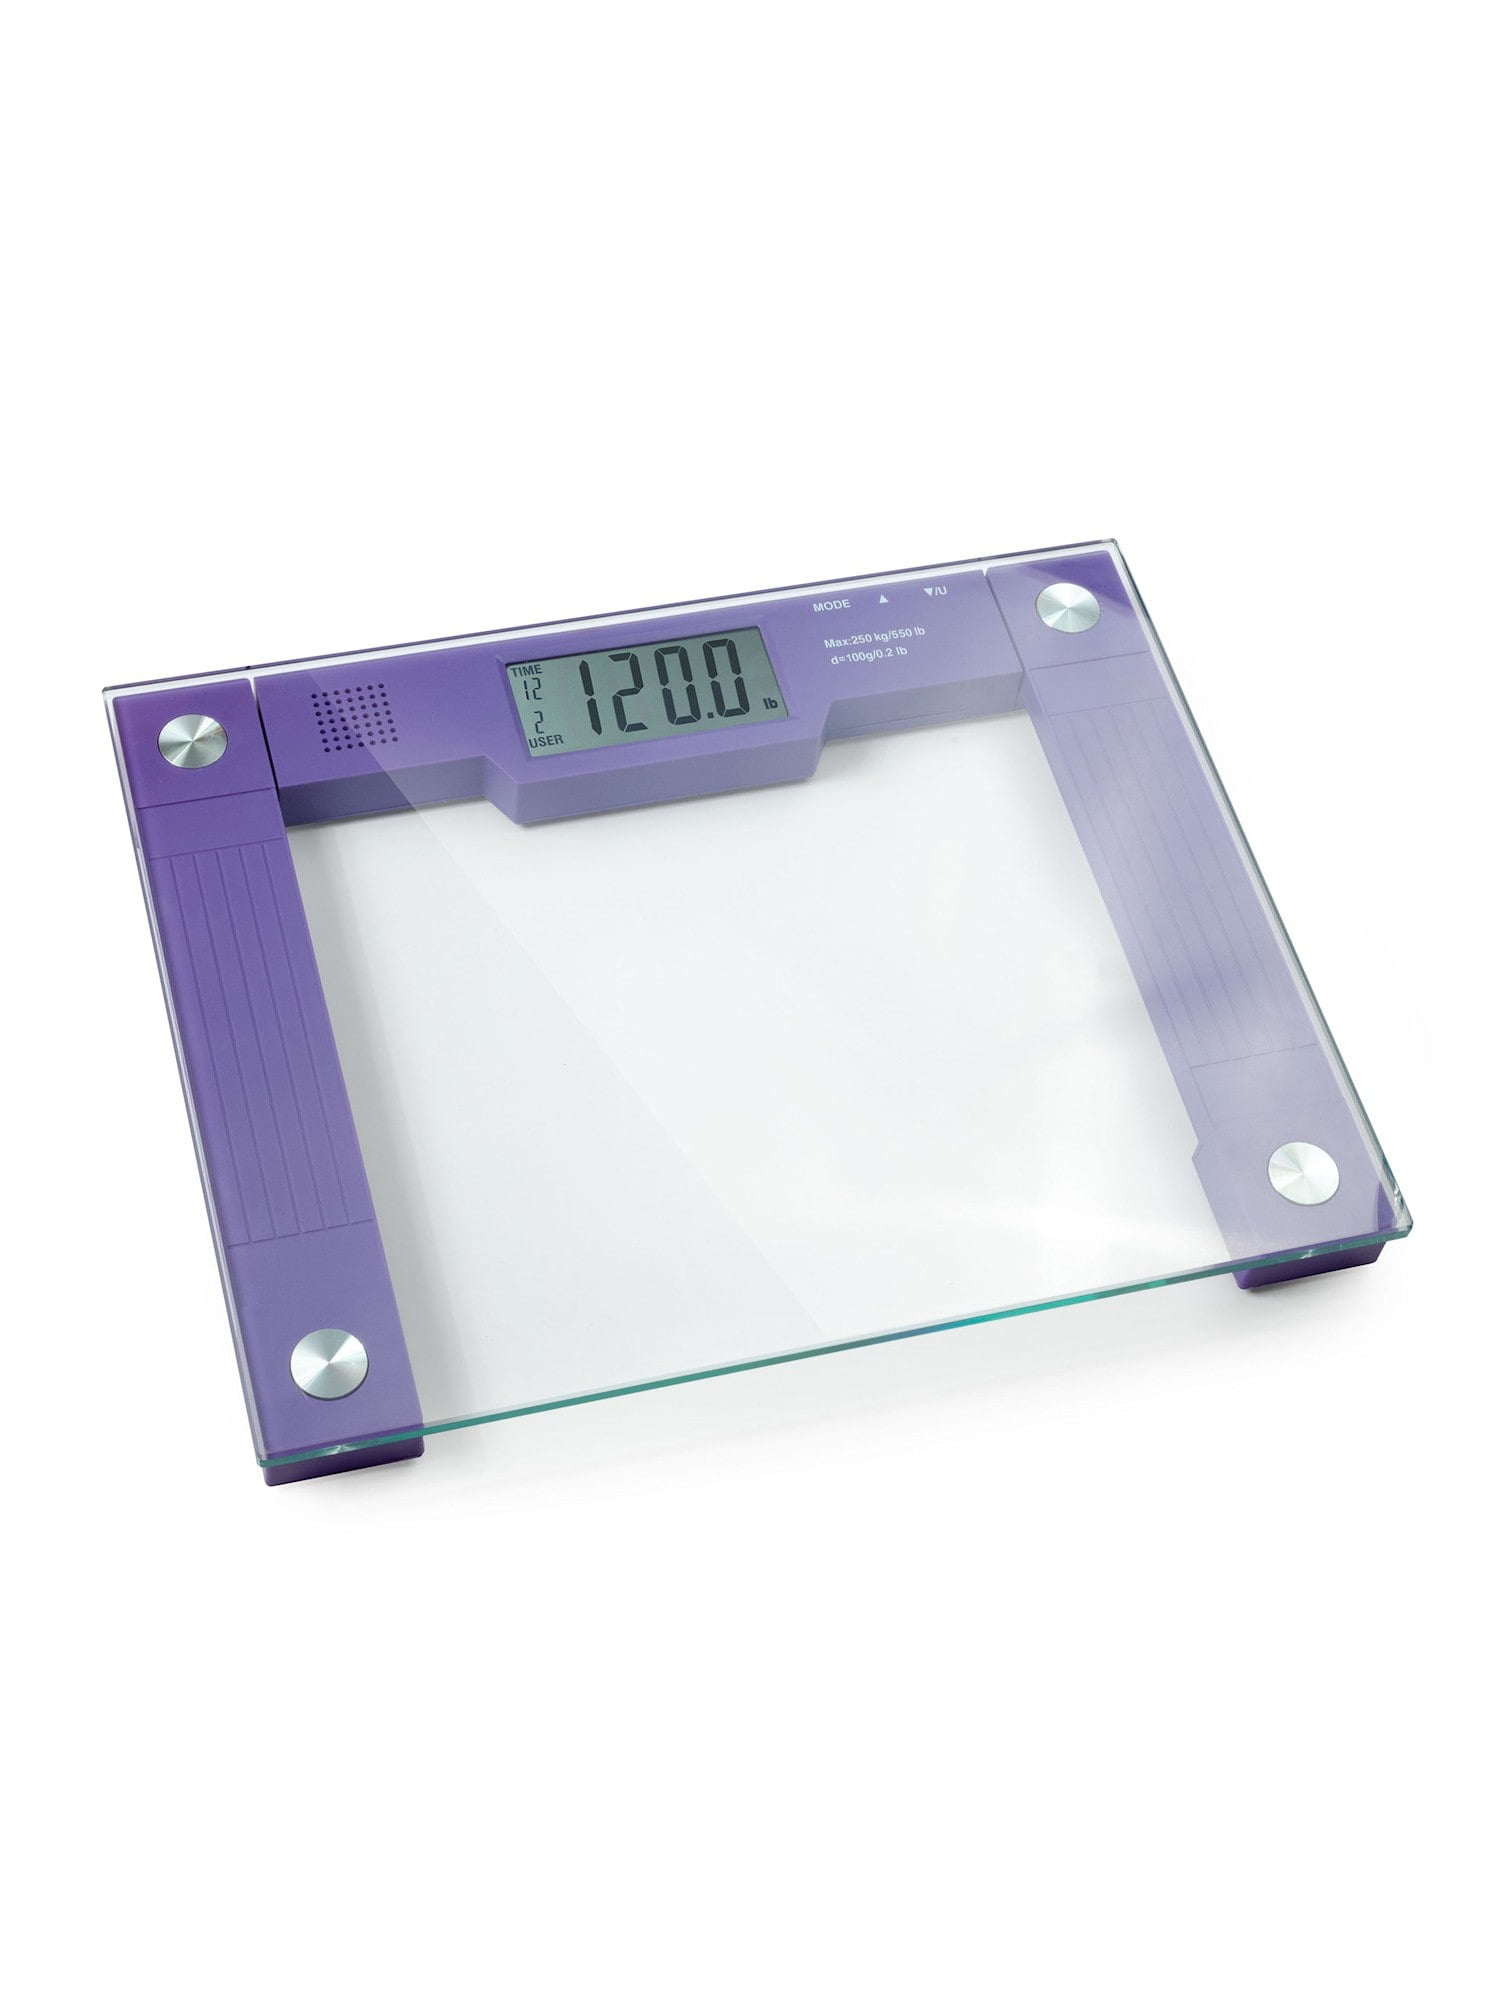 Extendable Face Extra Wide Scale - 550 lbs/250 kgs. Sale, Reviews. - Opentip